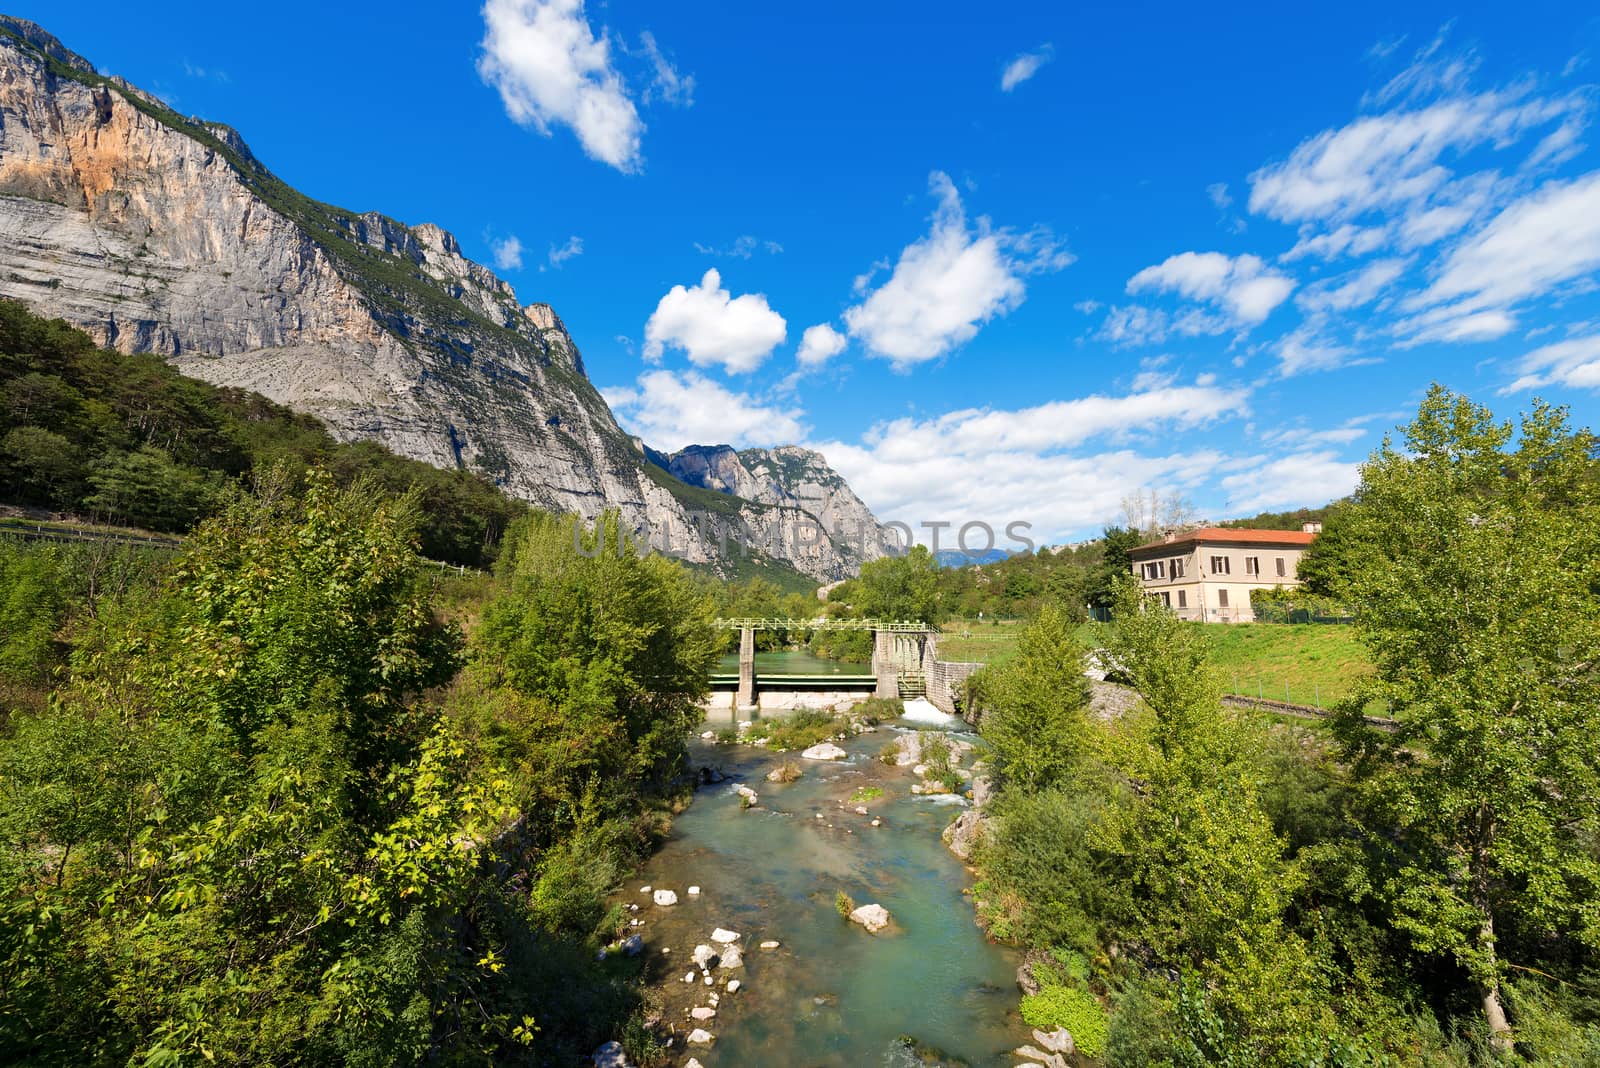 The Sarca River with old dam in the Sarca Valley in Trentino Alto Adige, Italy, Europe